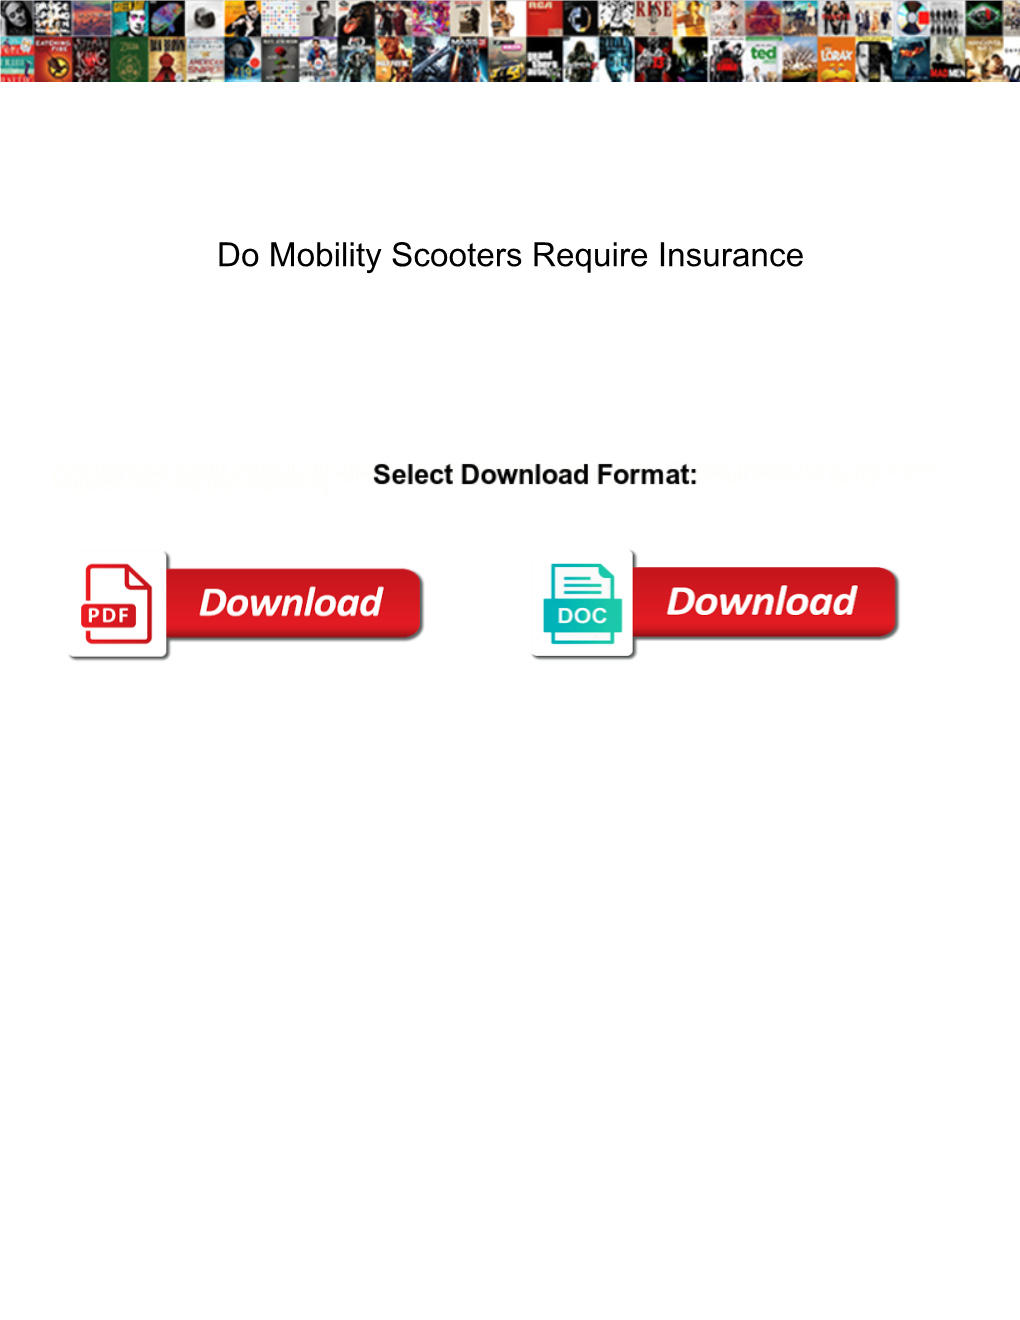 Do Mobility Scooters Require Insurance